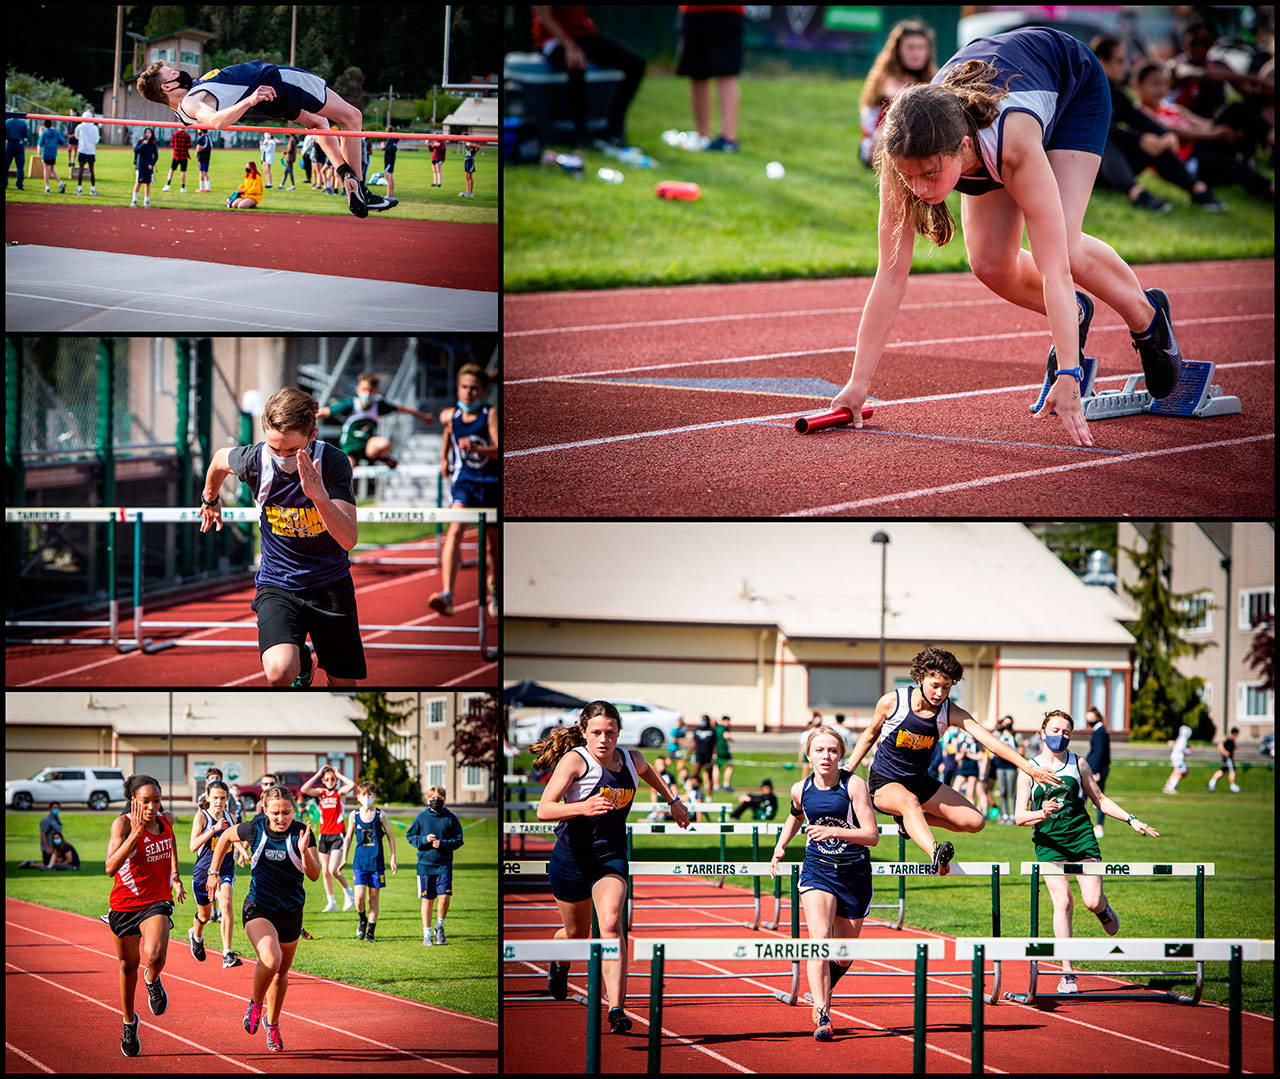 Top left, Rowan Marceau-Roache clears five feet in the high jump for victory. Top right, Lena Puz leads off Mustang Girls’ 4x100-meter relay. Center-left, Finnian Lawler finishes strong in the 75-meters hurdles. Bottom left, Laurel Calhoun in a tight race against Seattle Christian’s Tatum Carter. Bottom right, Hurdlers Neve DeVoght and Lena Puz in the 75-meters hurdles (Dawn Stief Photography).